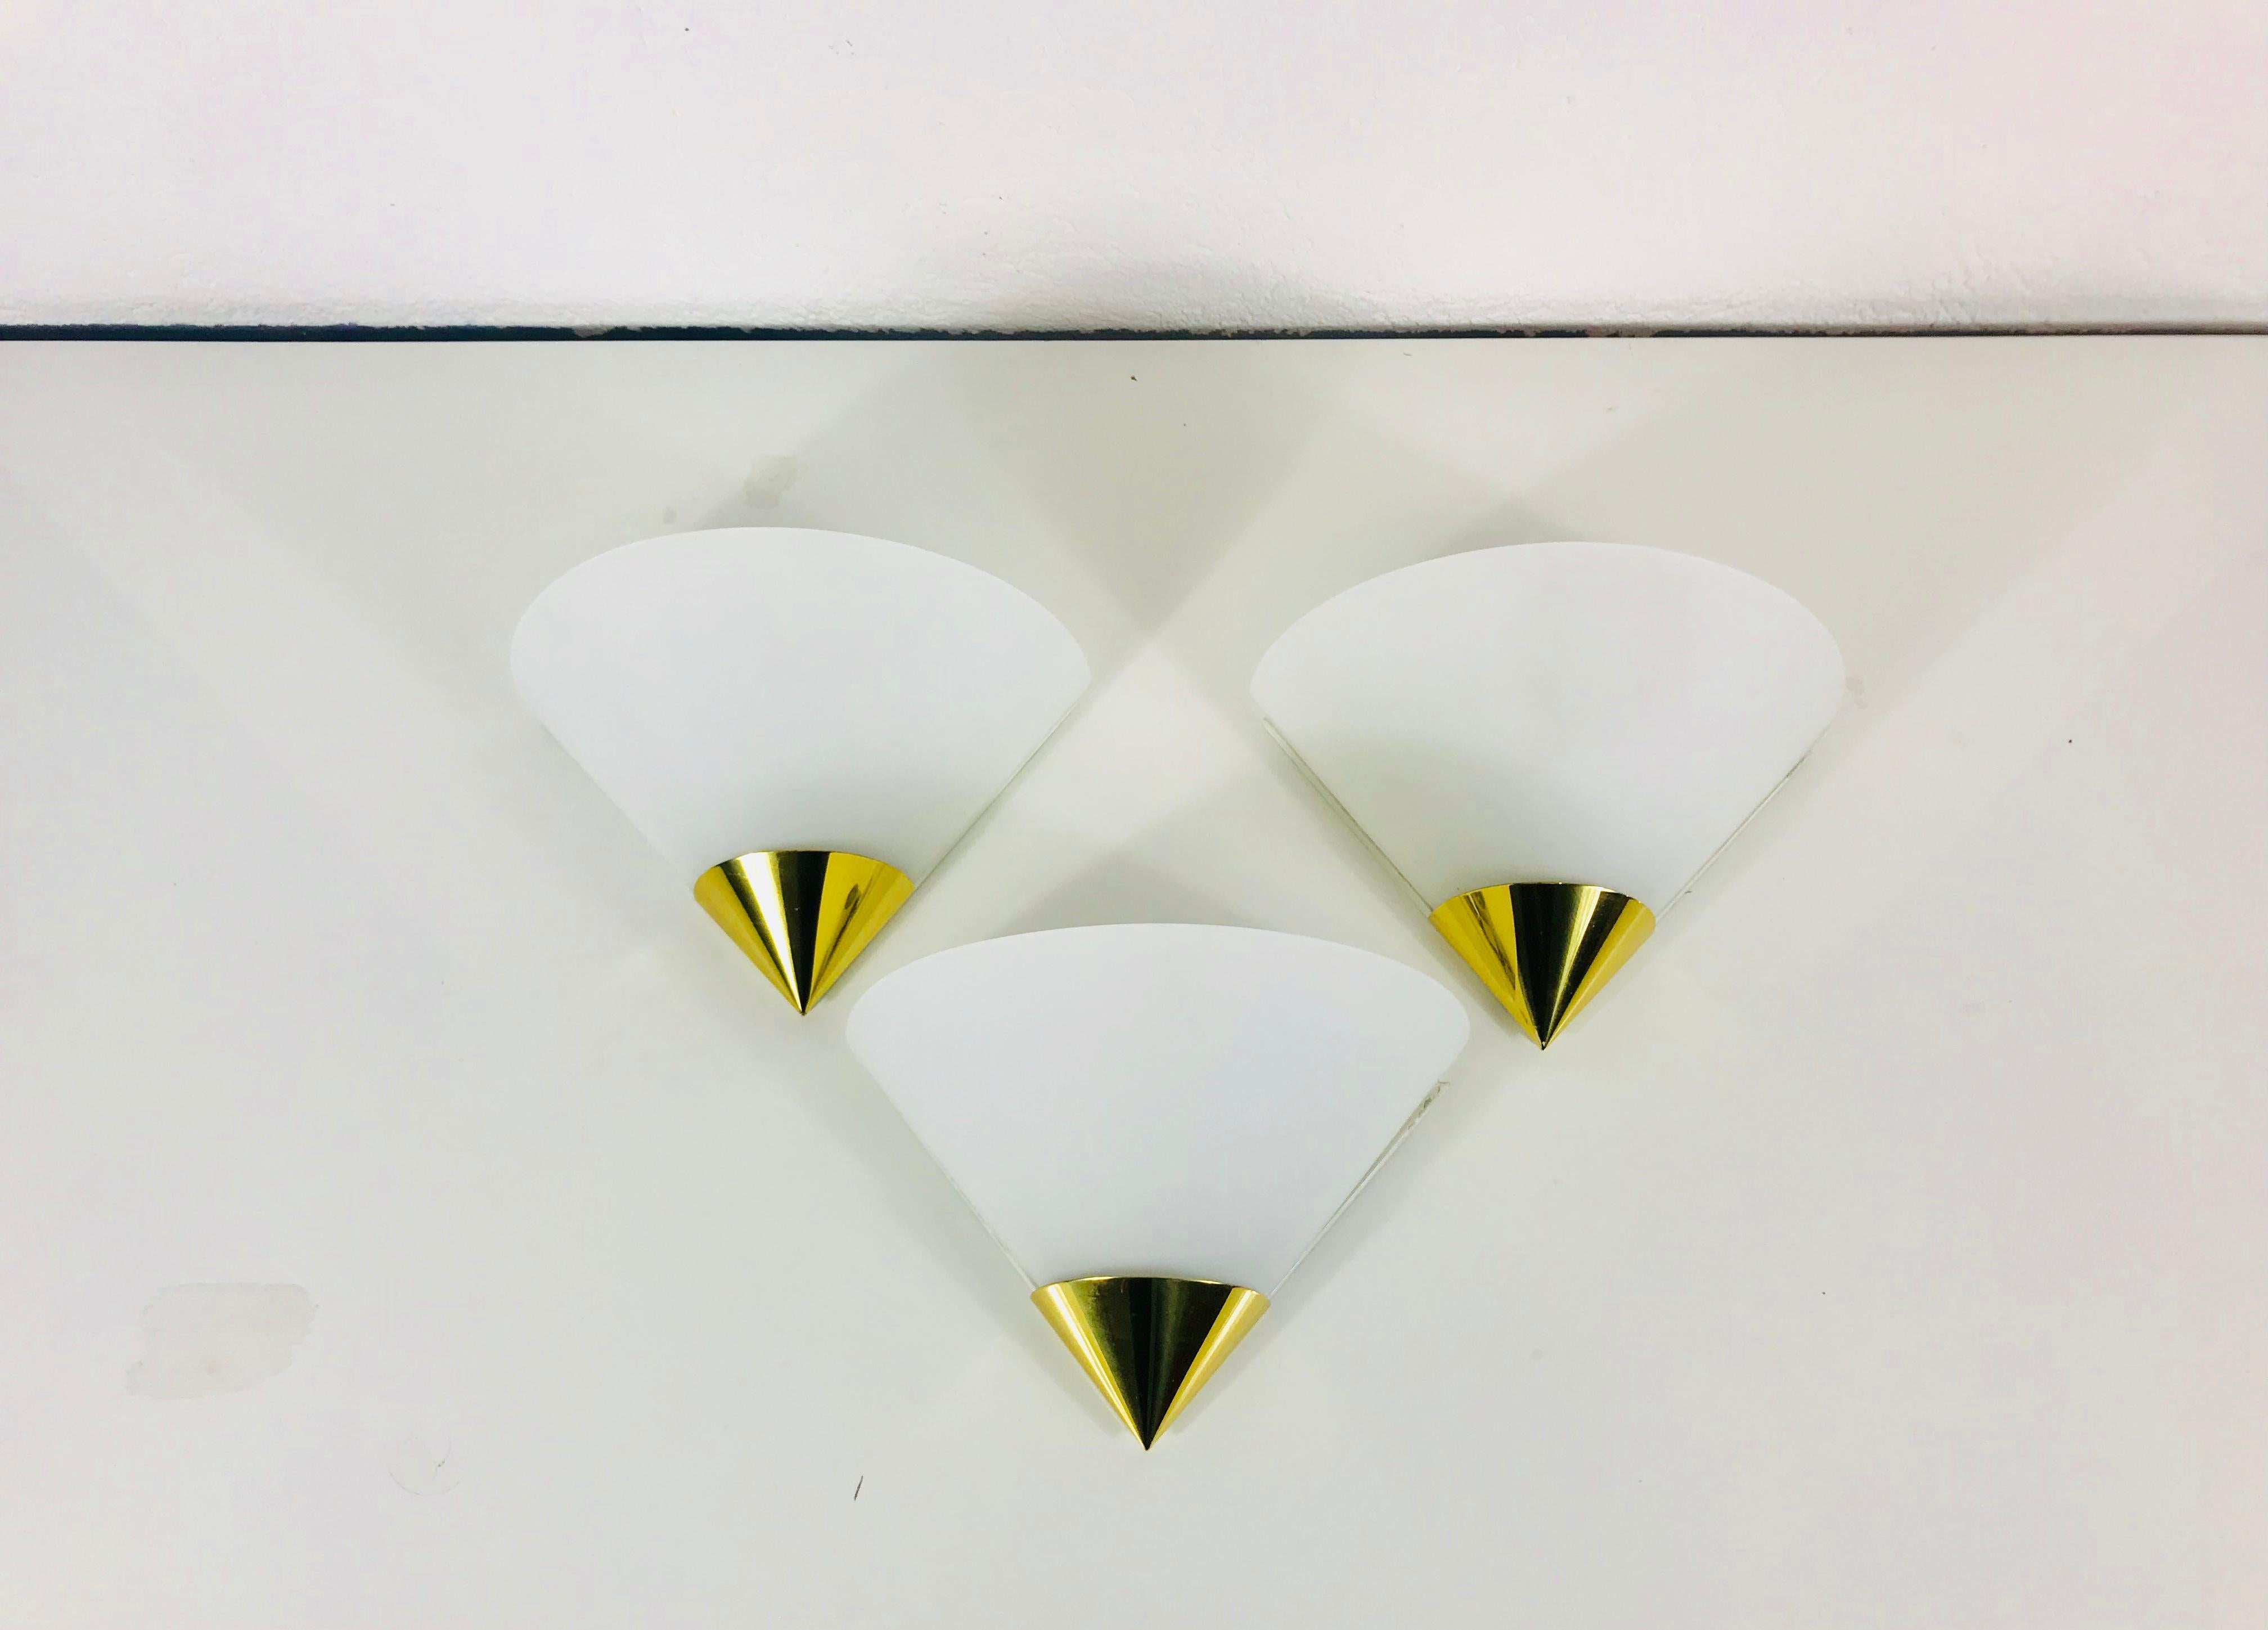 A beautiful set of 3 Mid-Century Modern wall lamps by Glashütte Limburg made in Germany in the 1970s. They have a beautiful triangle shape and are made of brass and opaline glass. The back is metal.

The light requires one E14 light bulb.